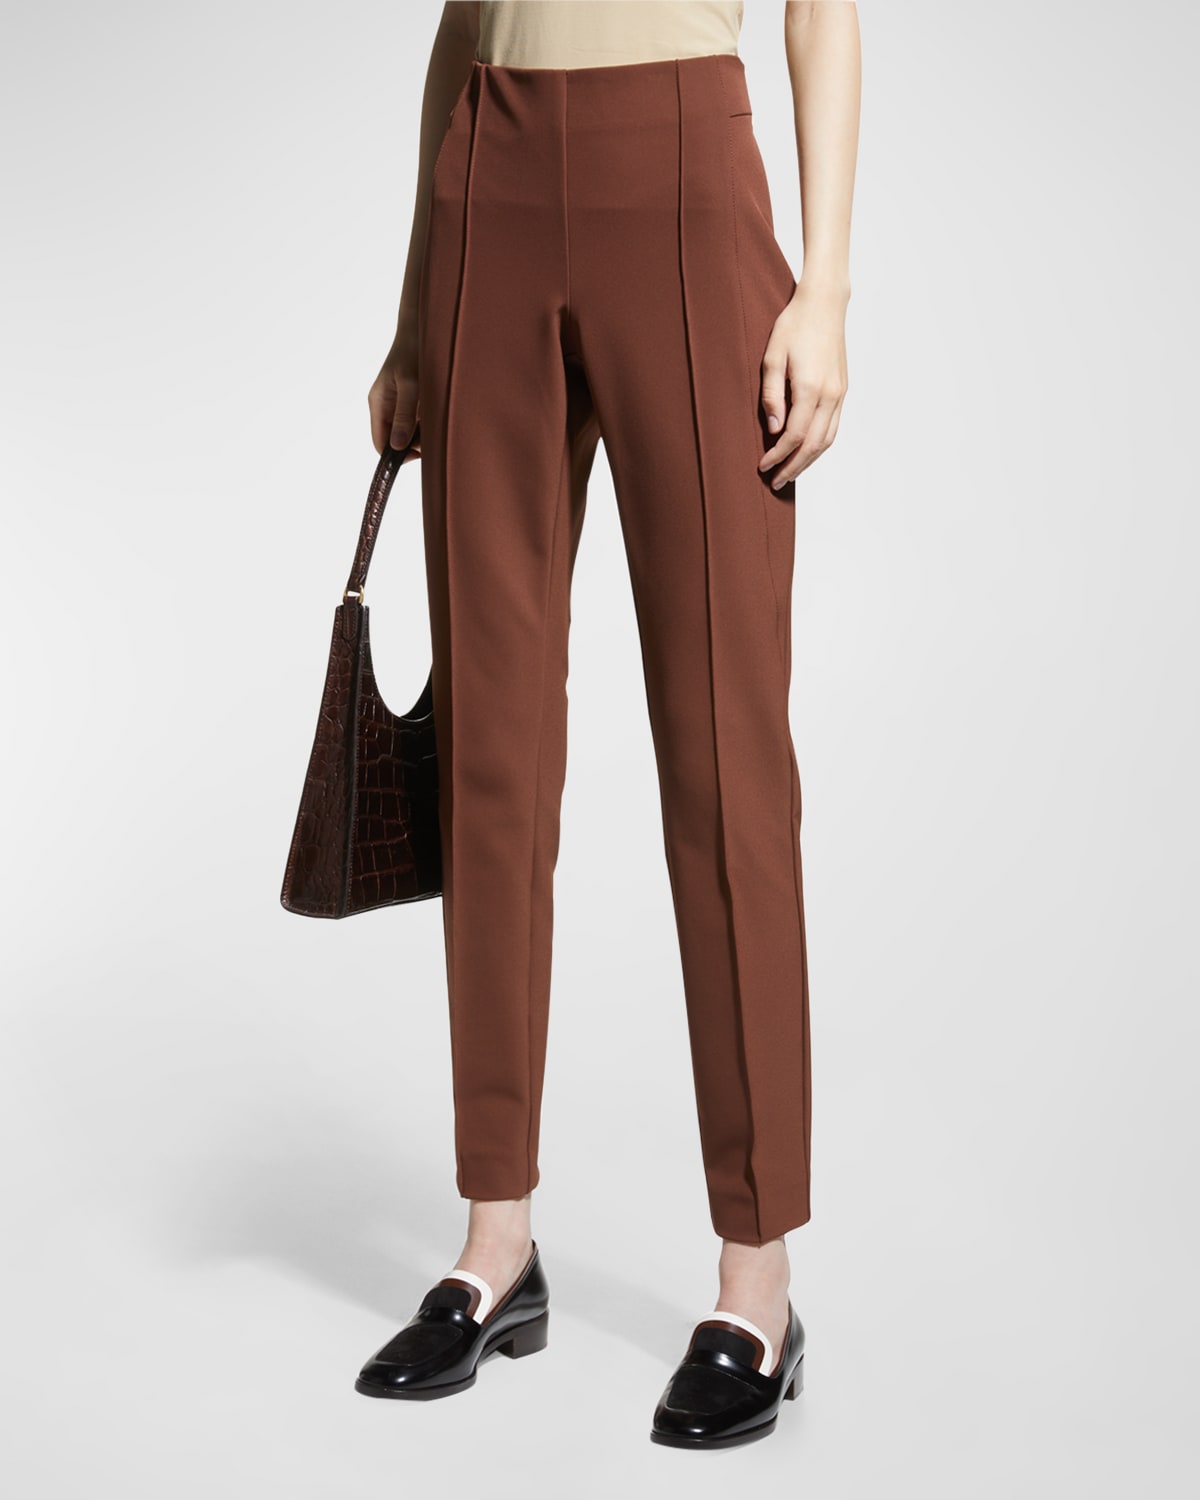 Lafayette 148 Gramercy Acclaimed-stretch Pants In Copper Dust